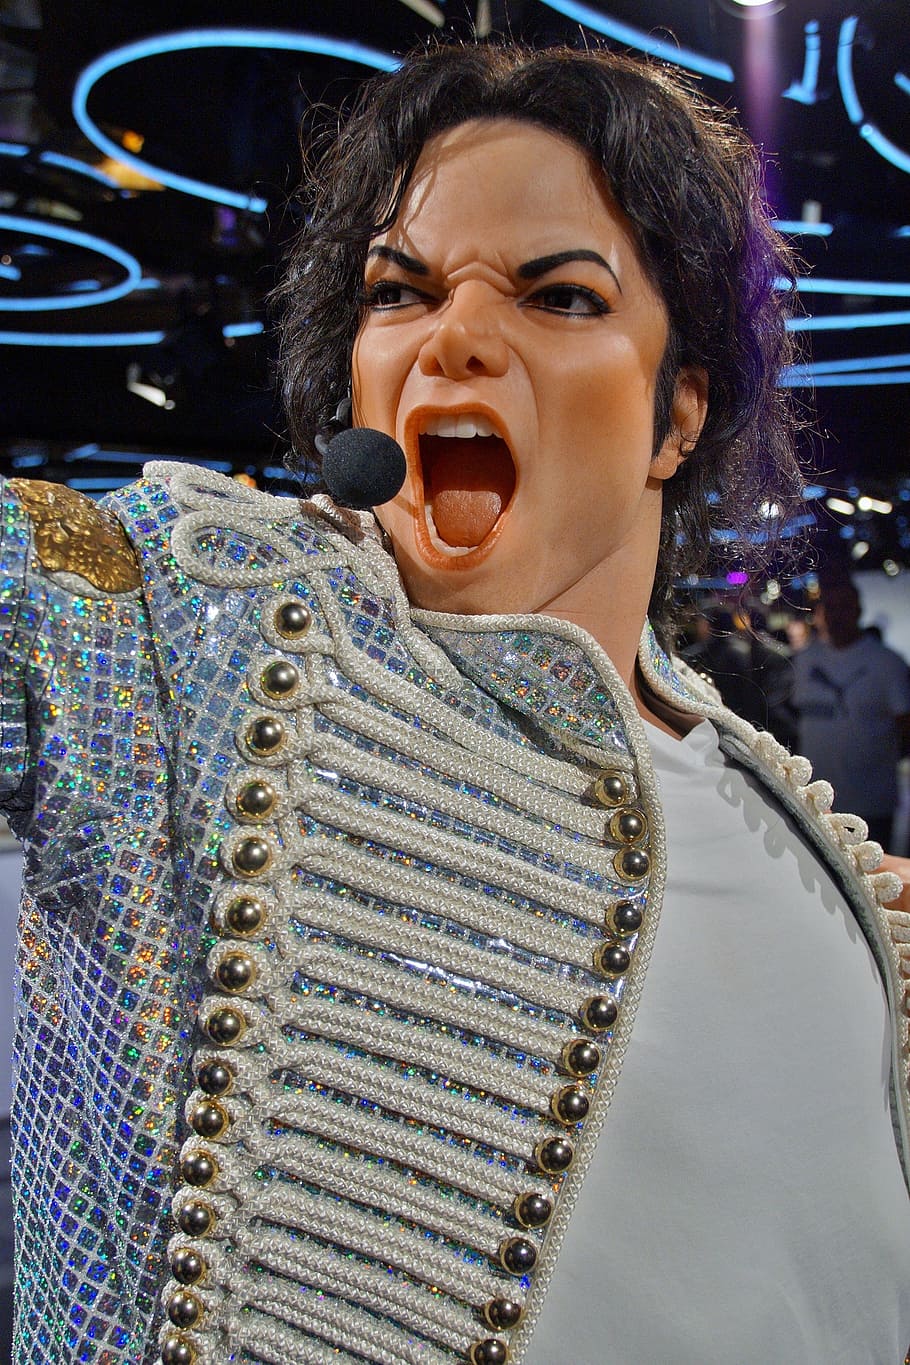 michael jackson wax statue, michael jackson, wax, the dummy, wax museum, grevin, singer, one person, mouth, mouth open